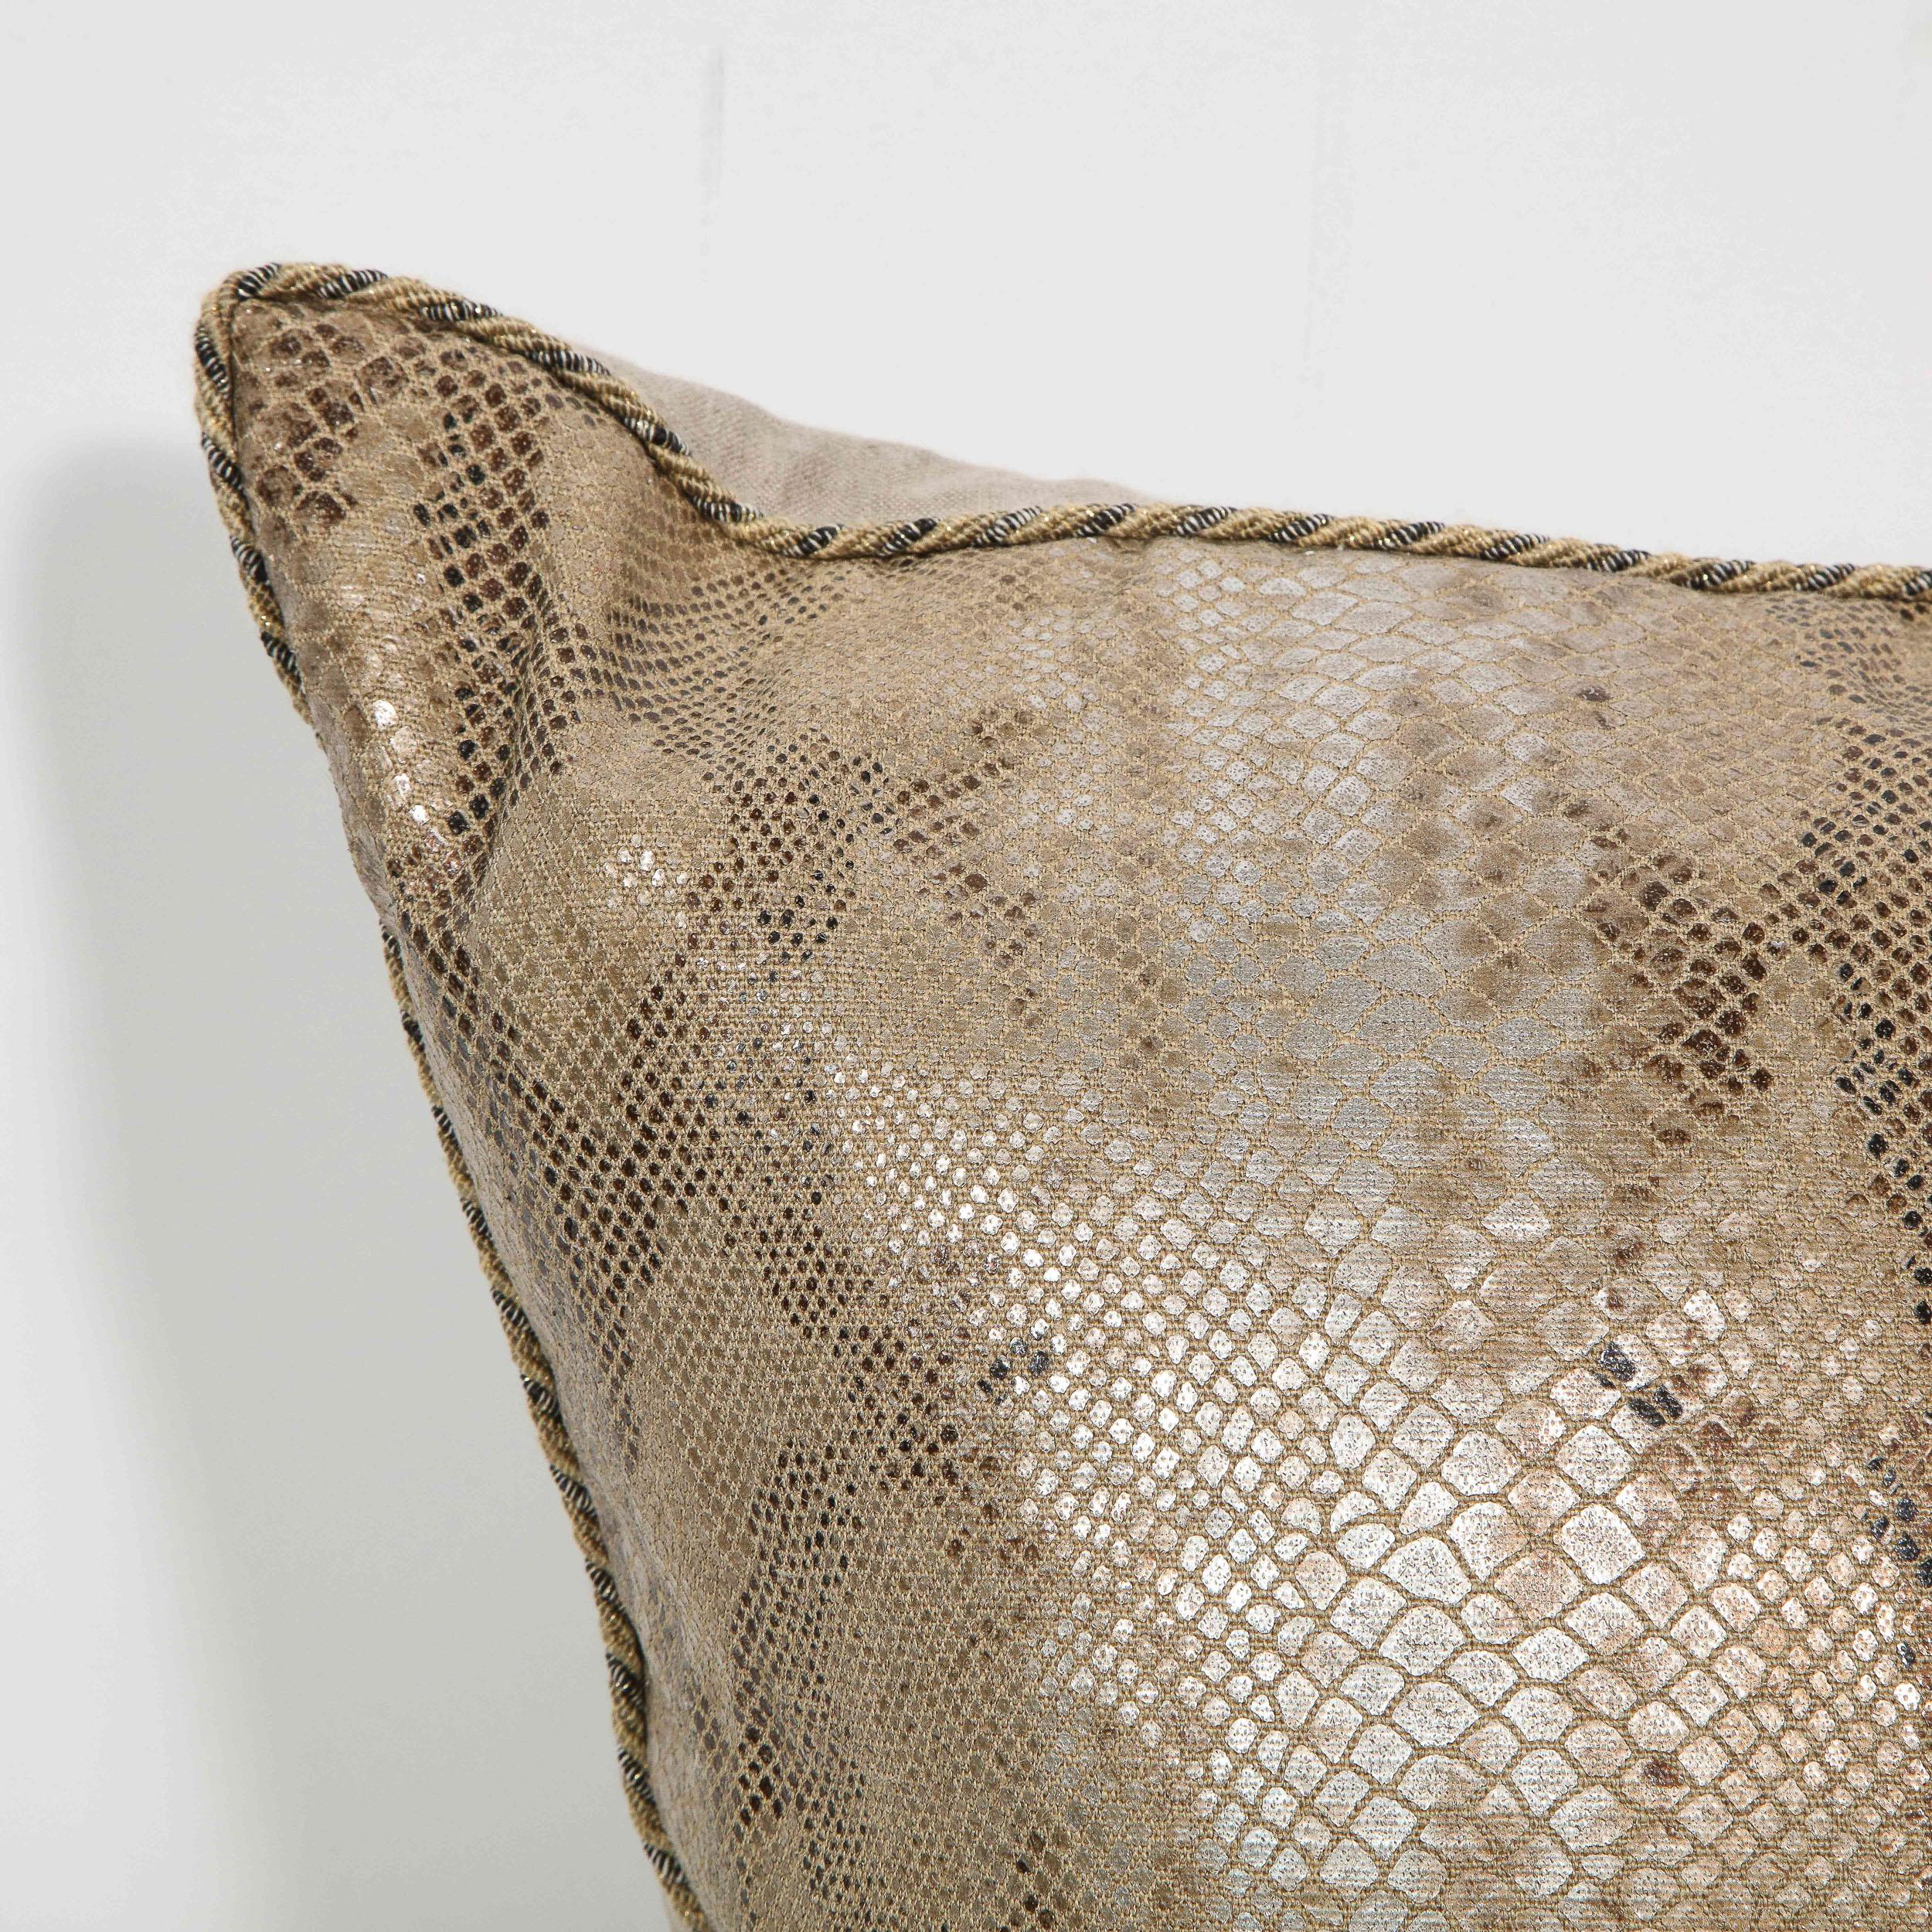 American Modernist Iridescent Tan and Metallic Python Pattern Pillow with Helix Piping